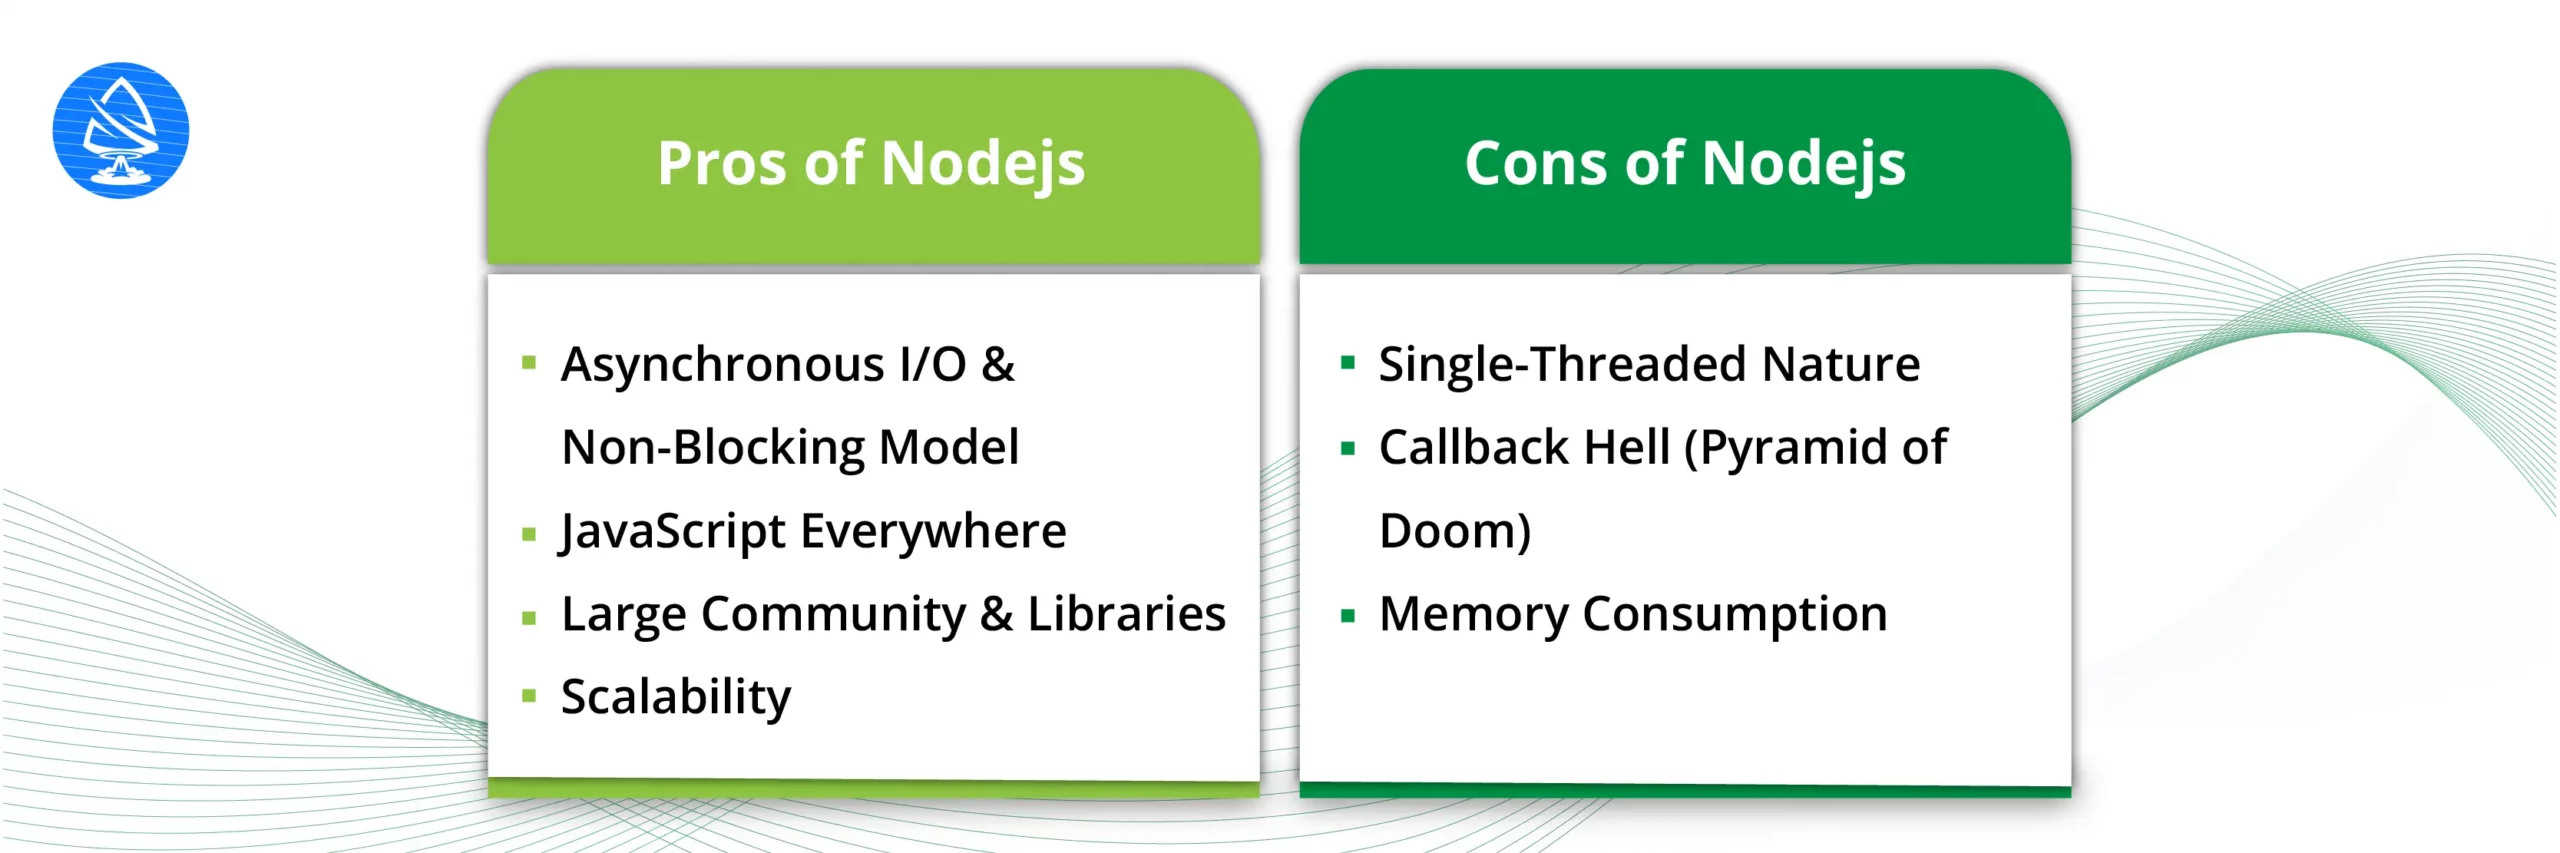 Pros and Cons of Nodejs 